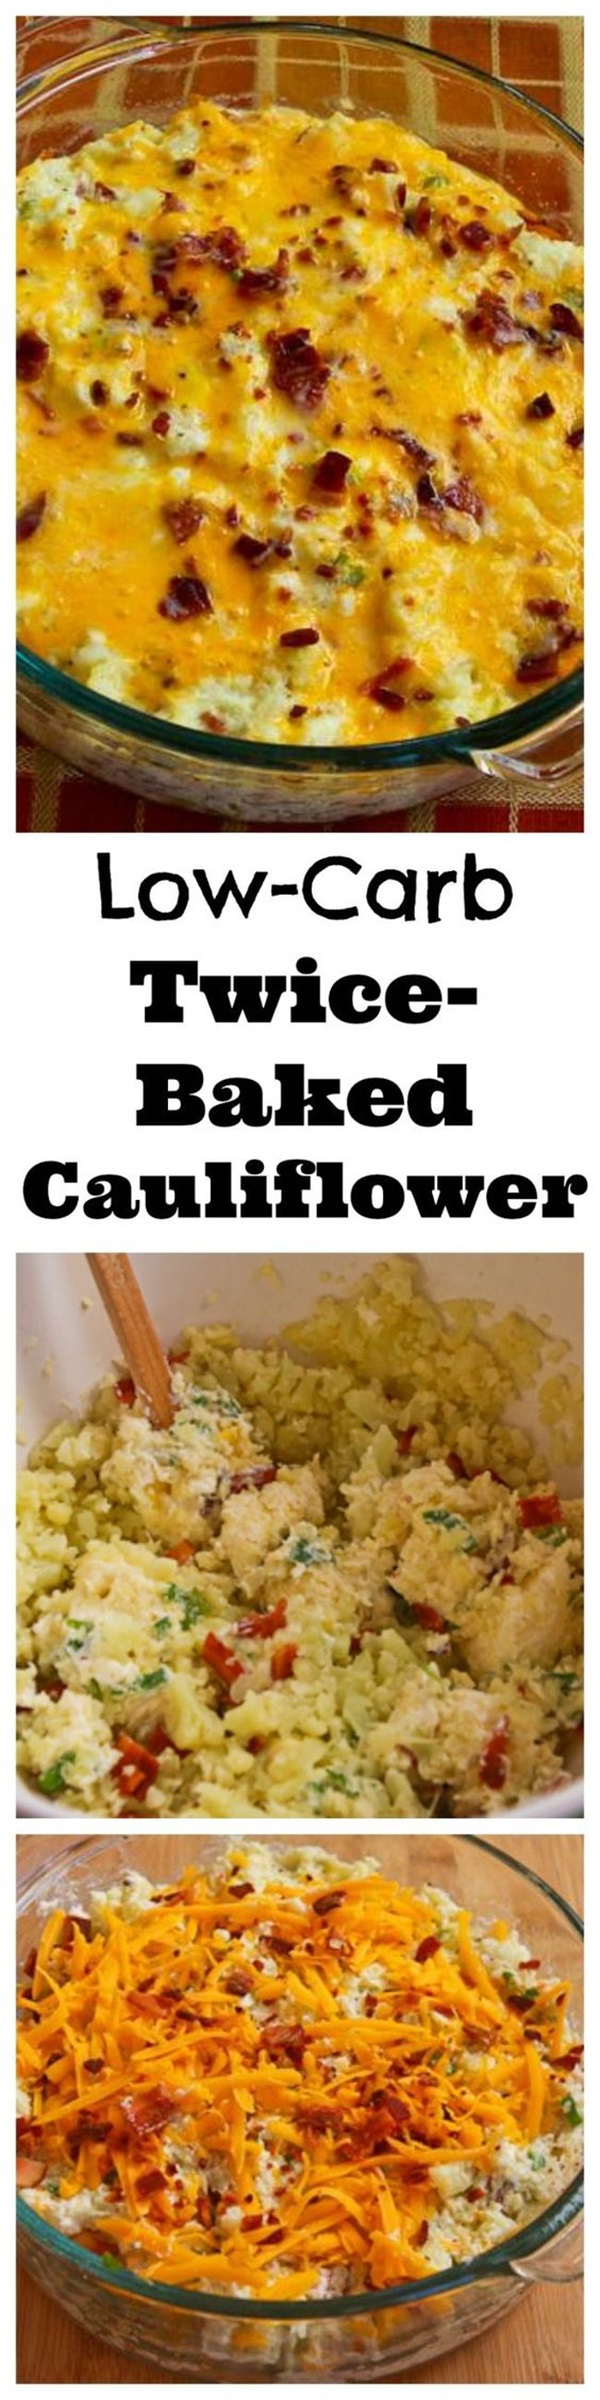 Ways To Use Cauliflower As A Low-Carb Replacement (3)